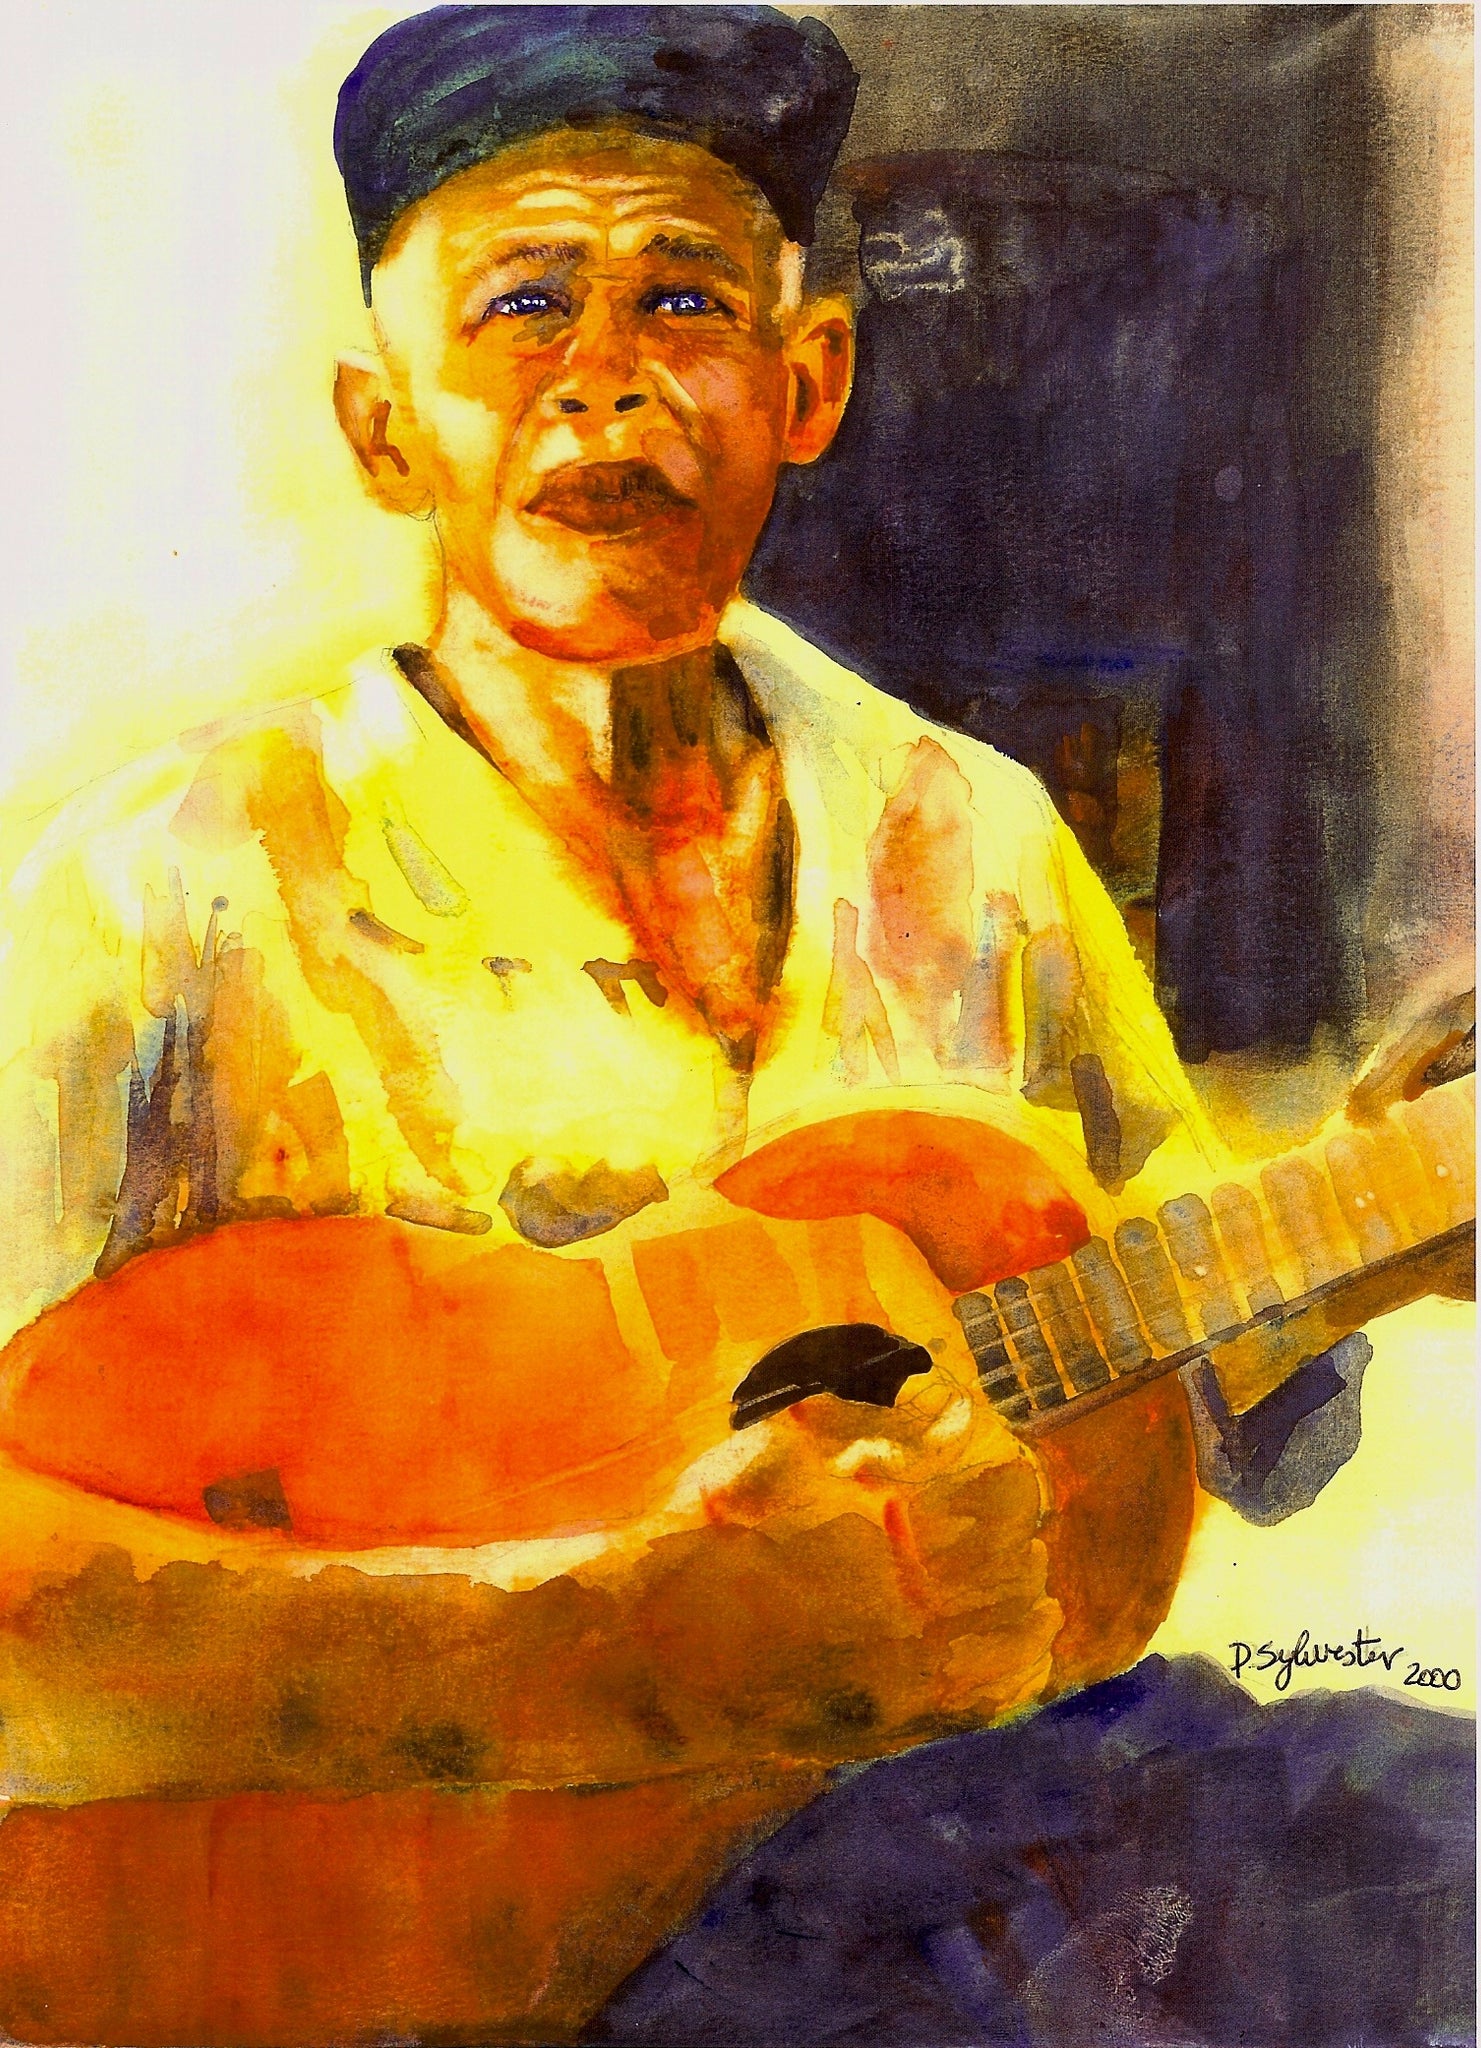 MUSICIANS - OLD GUITAR PLAYER